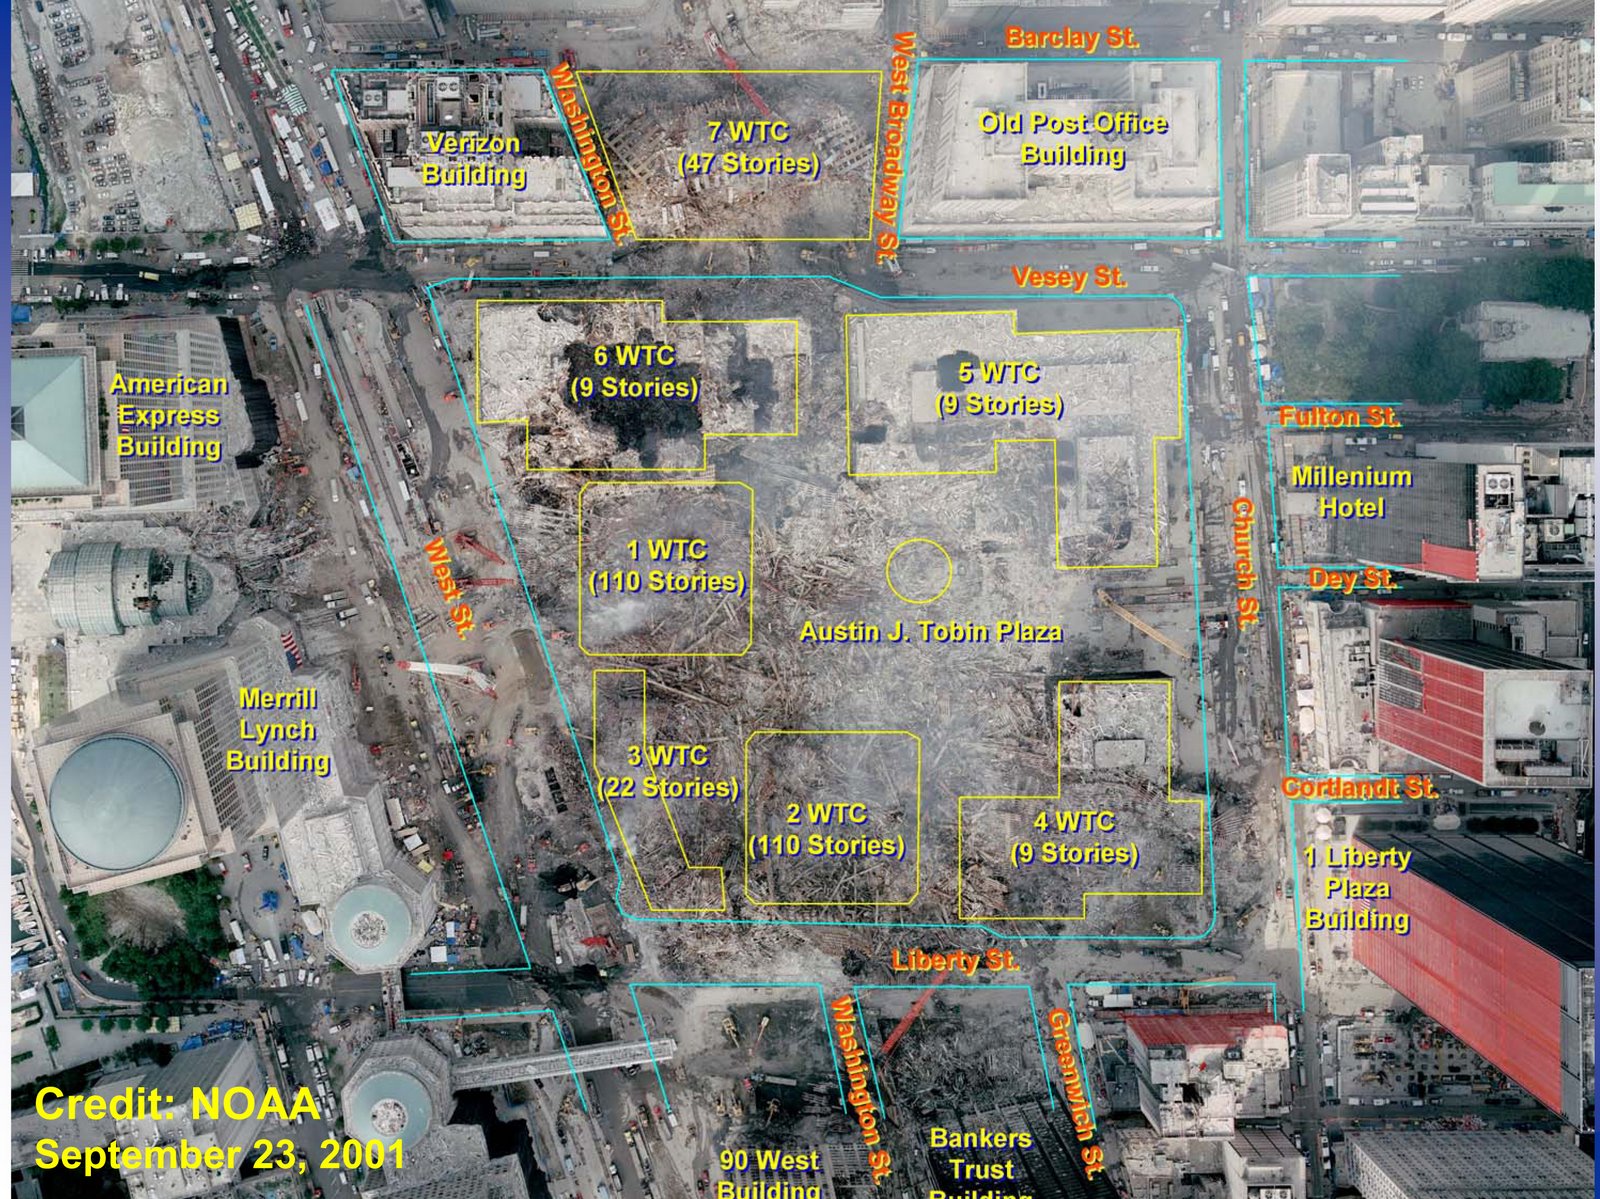 [World_Trade_Center_Site_After_9-11_Attacks_With_Original_Building_Locations.jpg]